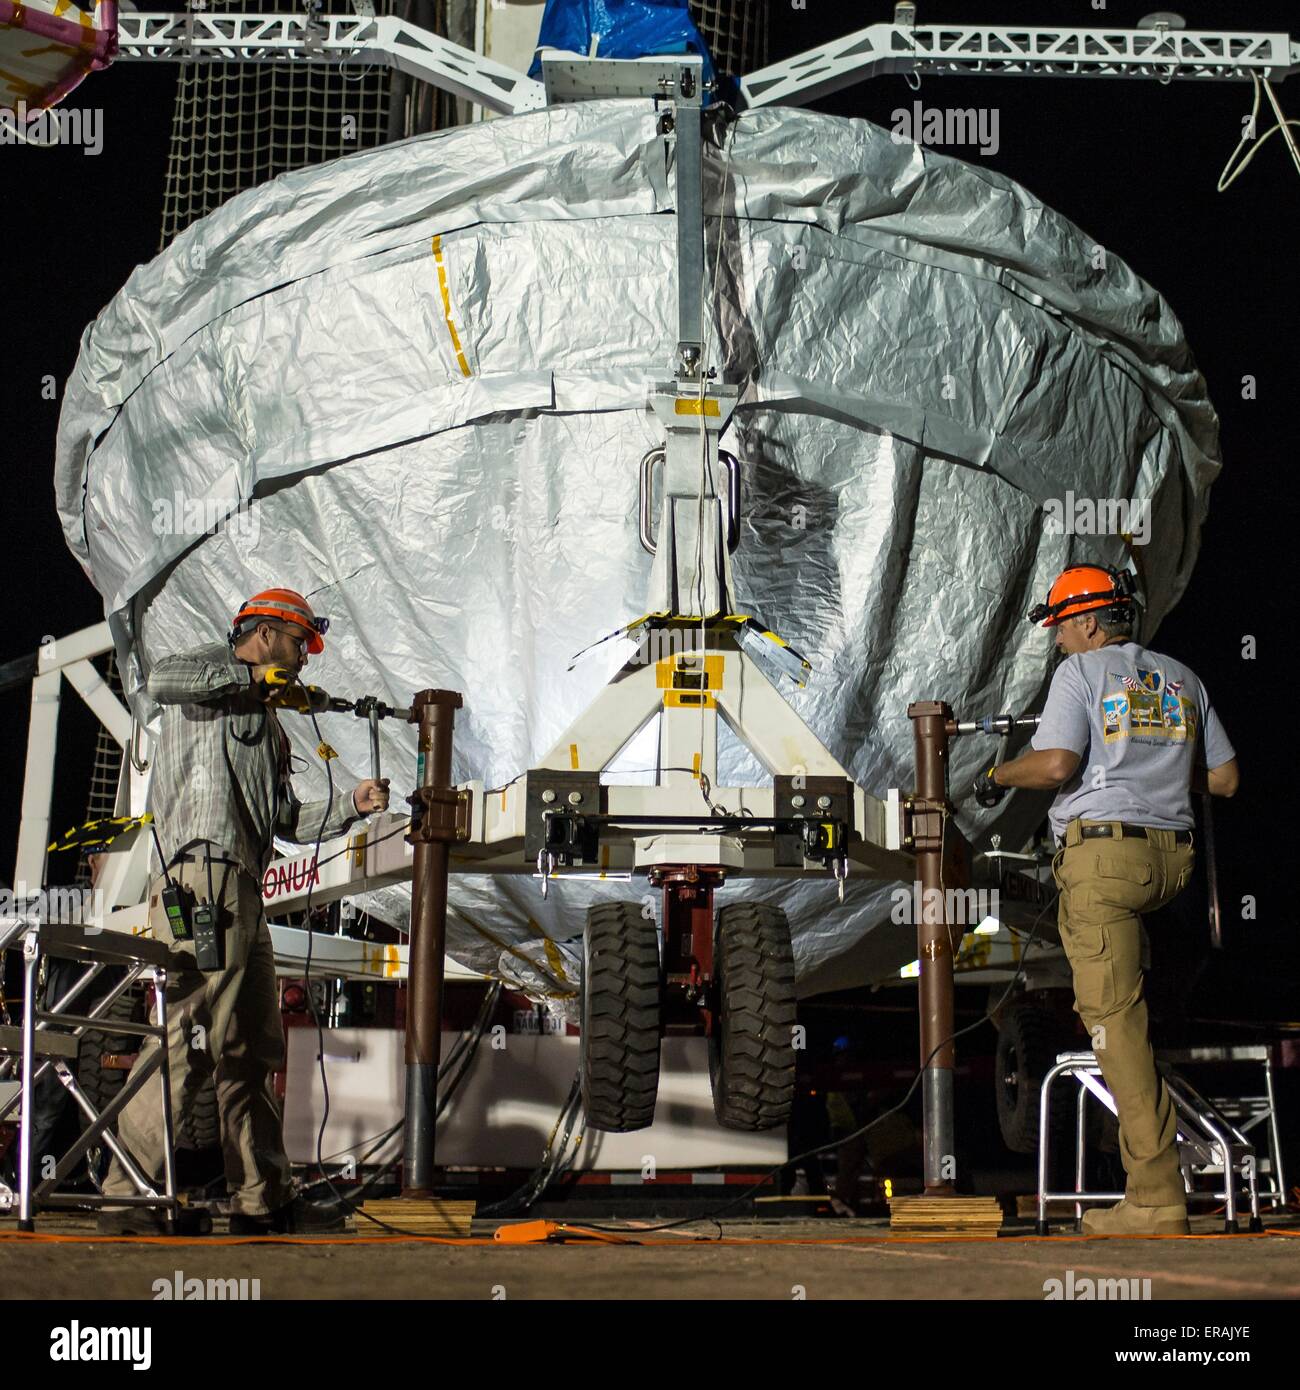 NASA engineers prepare the Low-Density Supersonic Decelerator to be lifted into position for a full mission dress rehearsal at the U.S. Navy Pacific Missile Range Facility May 29, 2015 in Kauai, Hawaii.  The LDSD tests new concepts in entry, descent and landing of spacecraft safely on the surface of Mars. Stock Photo